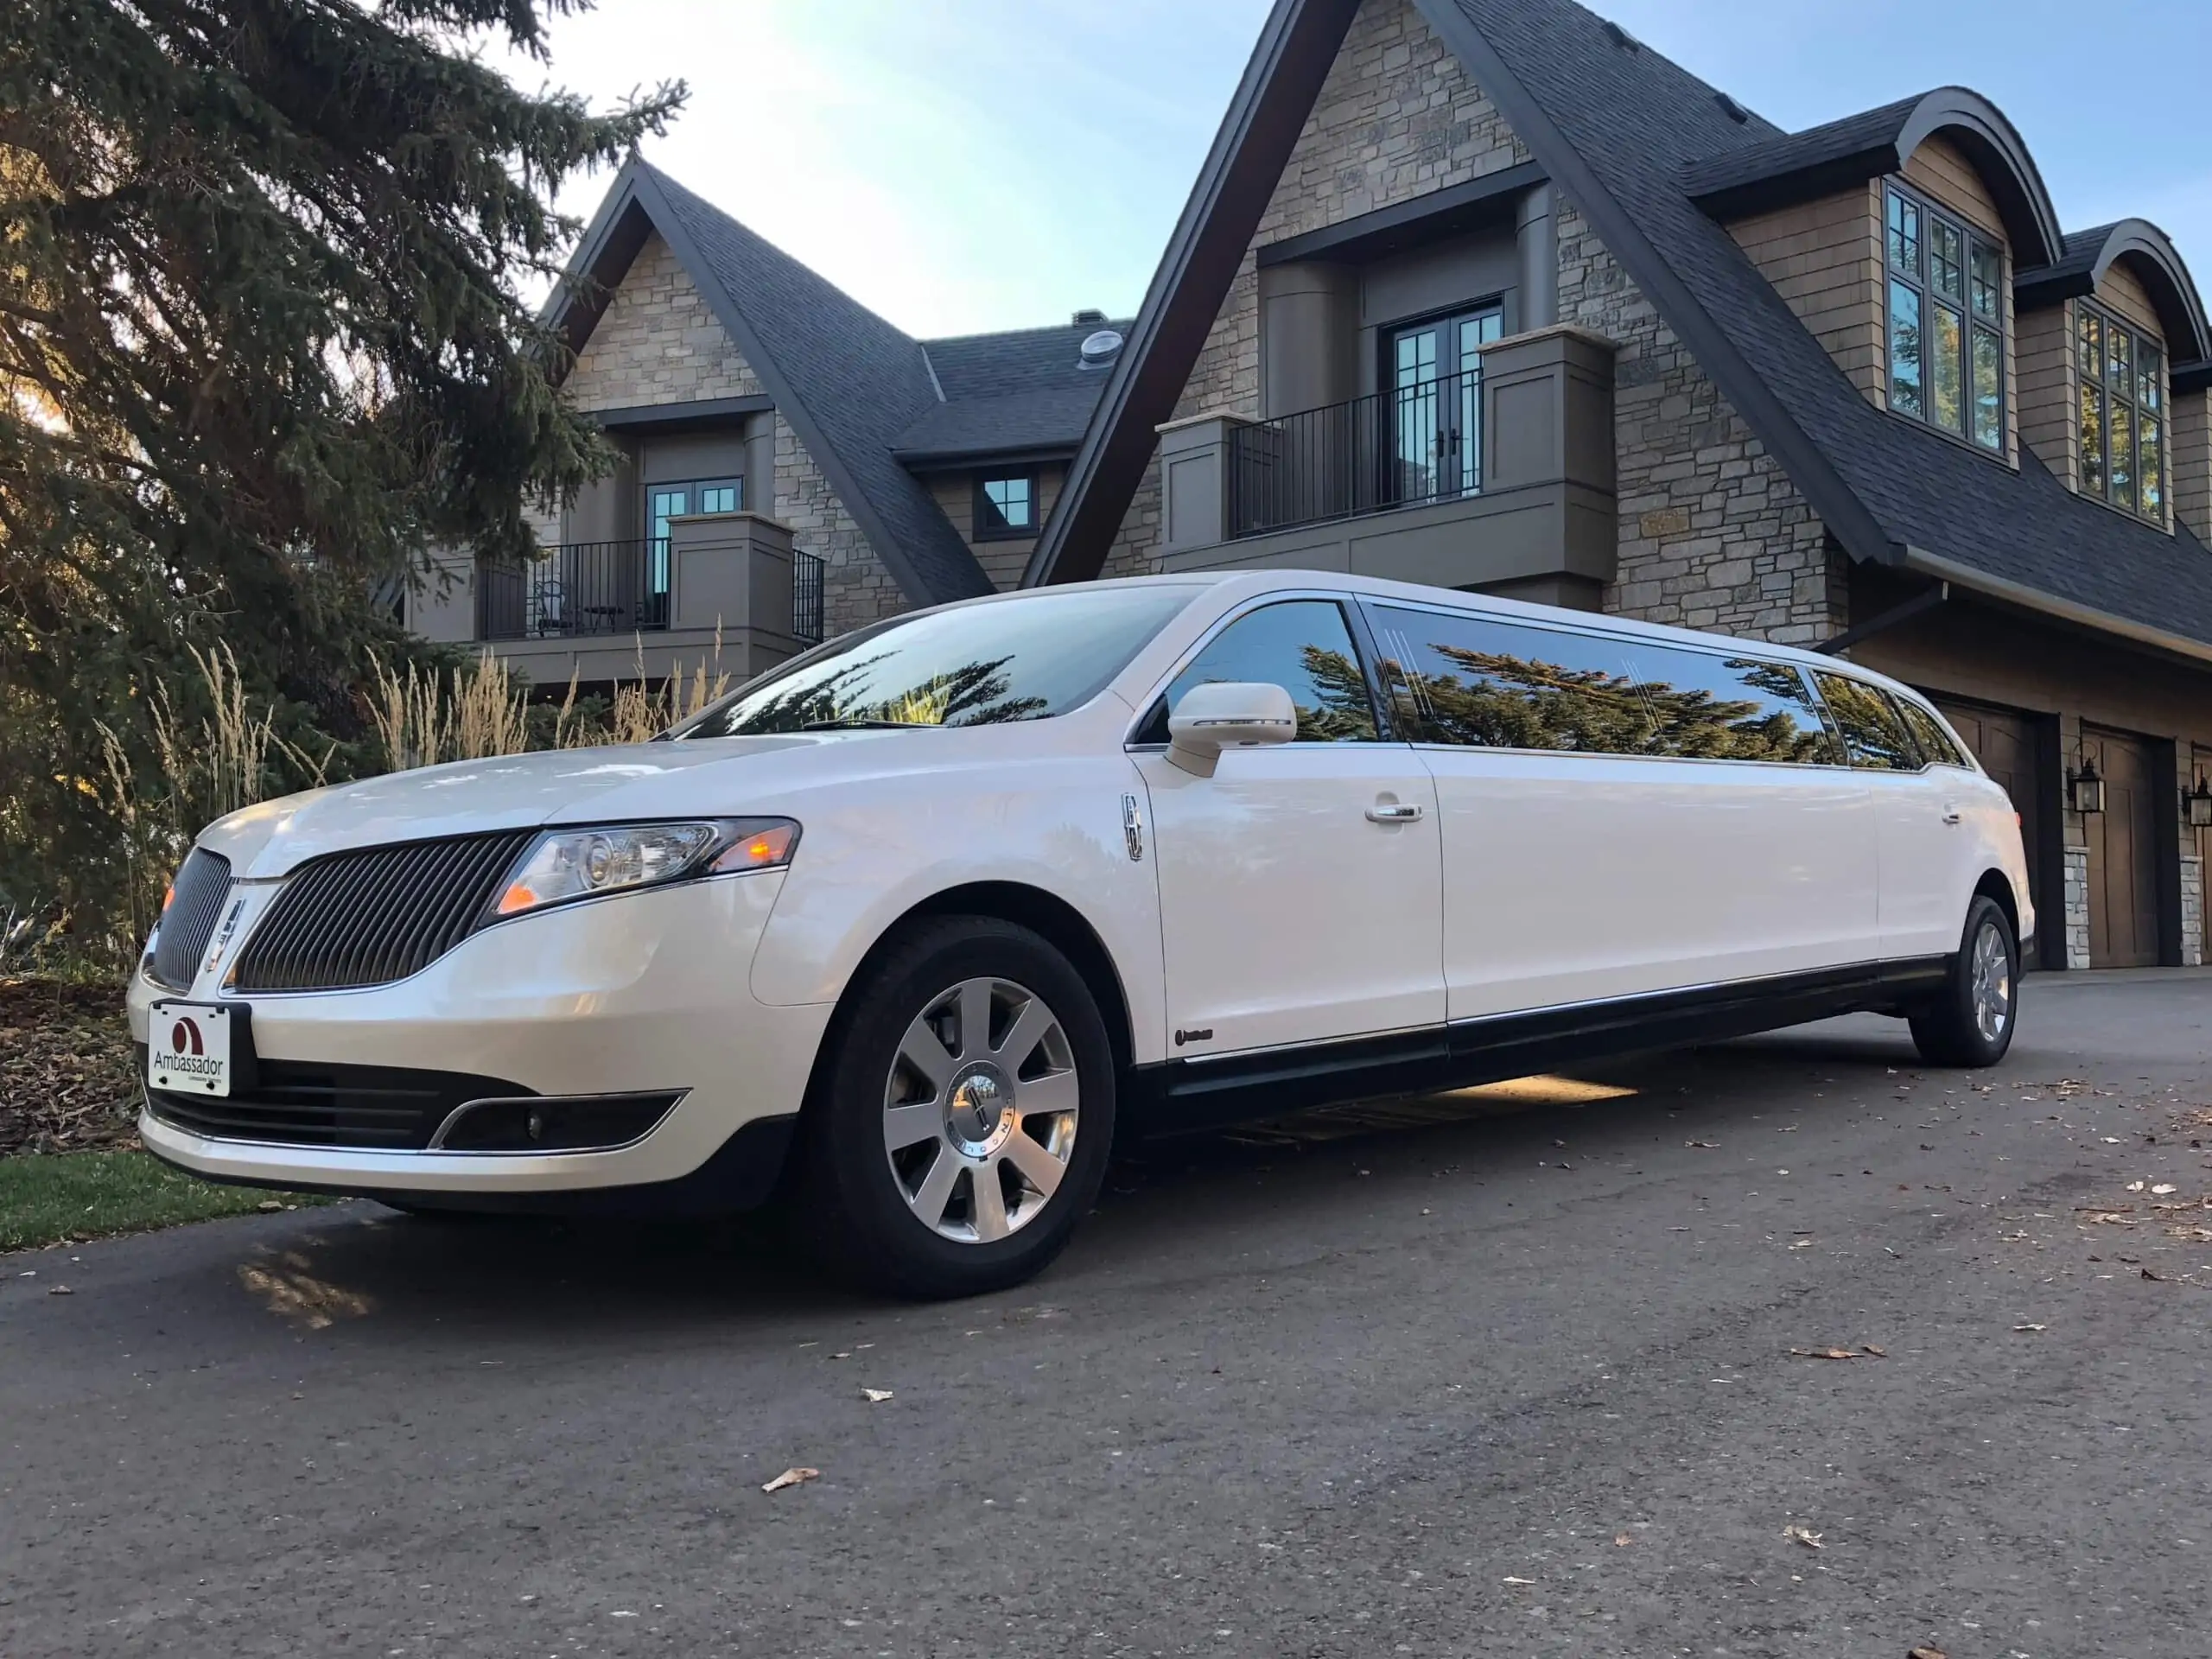 Why You Should Hire A Corporate Limo Service